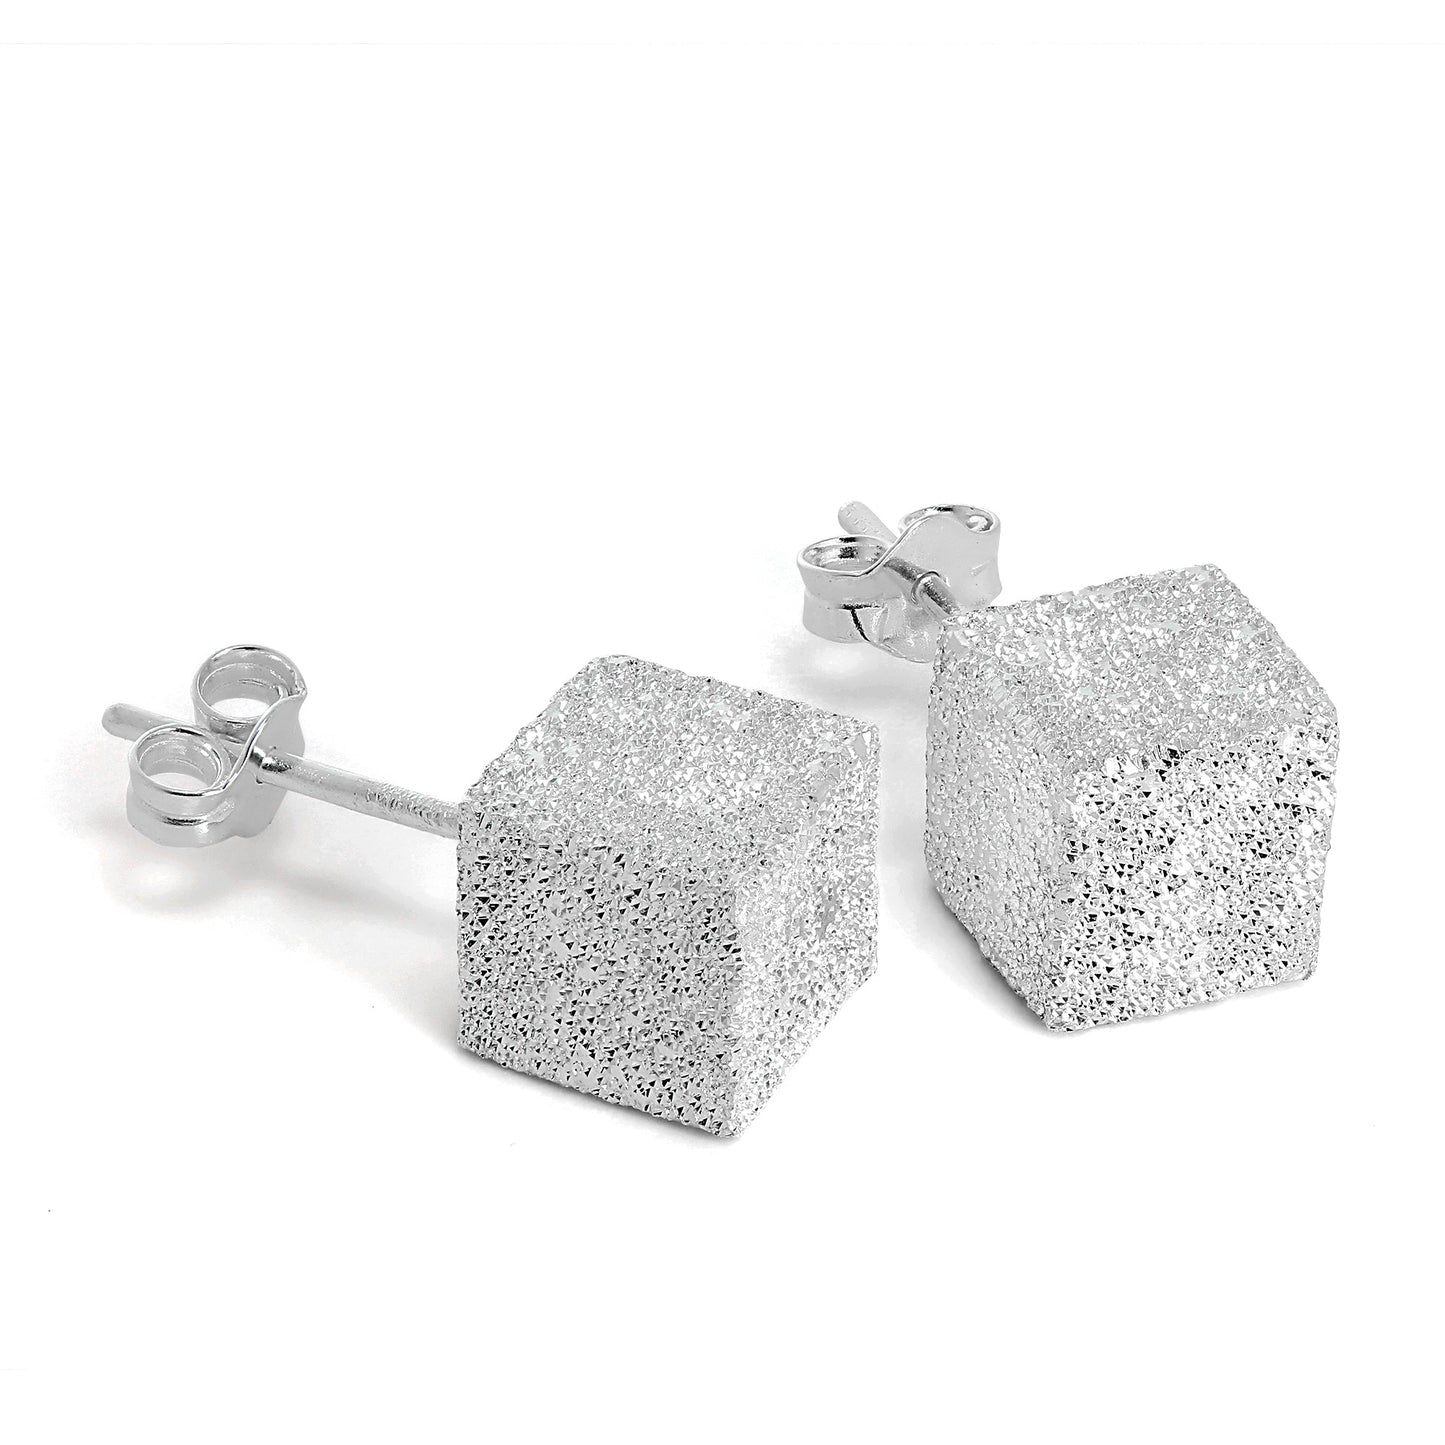 Frosted Sterling Silver Cube Stud Earrings 5mm - 7mm